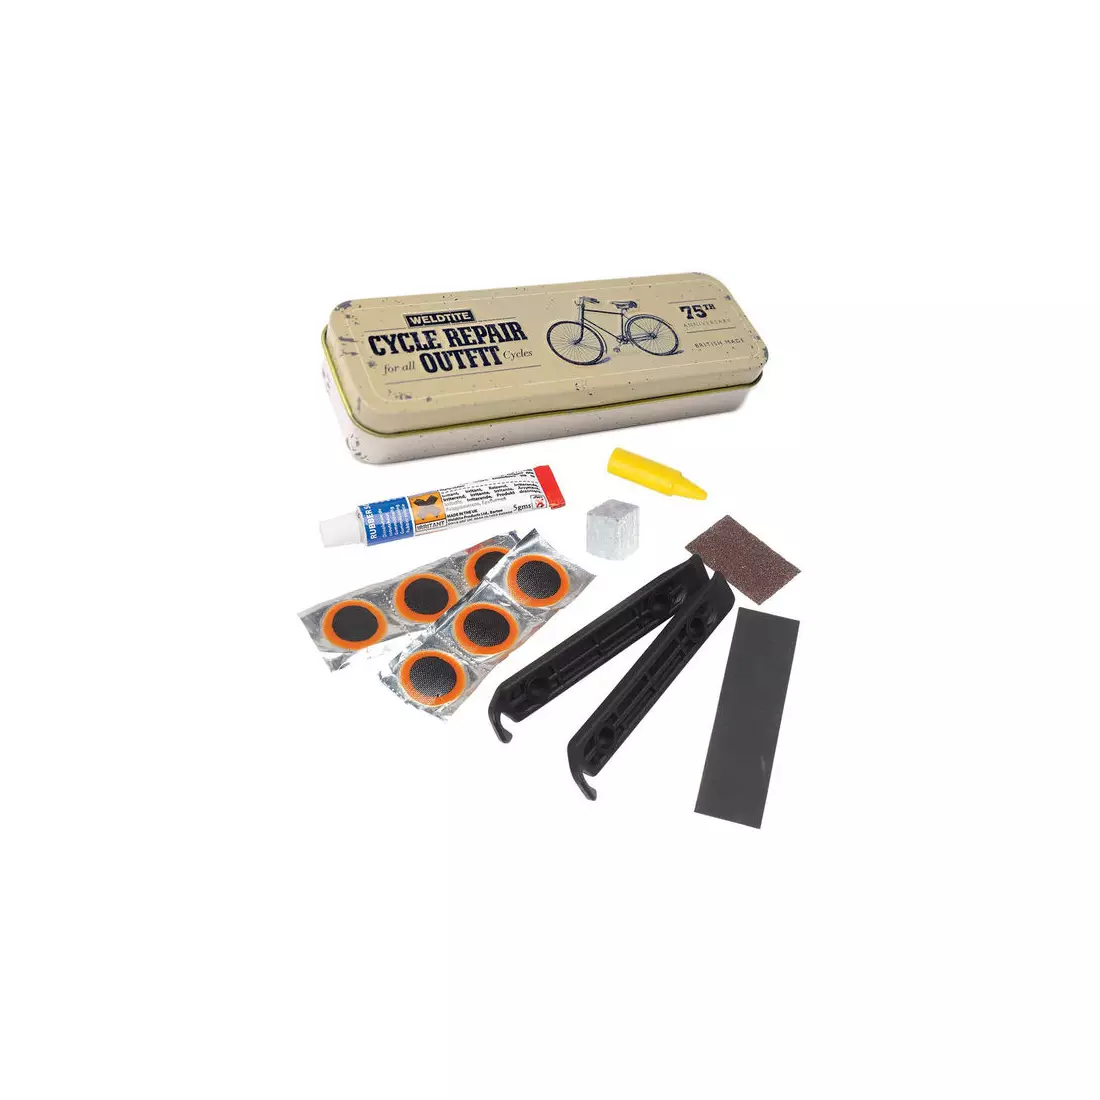 WELDTITE kit de reparare a anvelopelor vintage cycle repair outfit tin WLD-01075